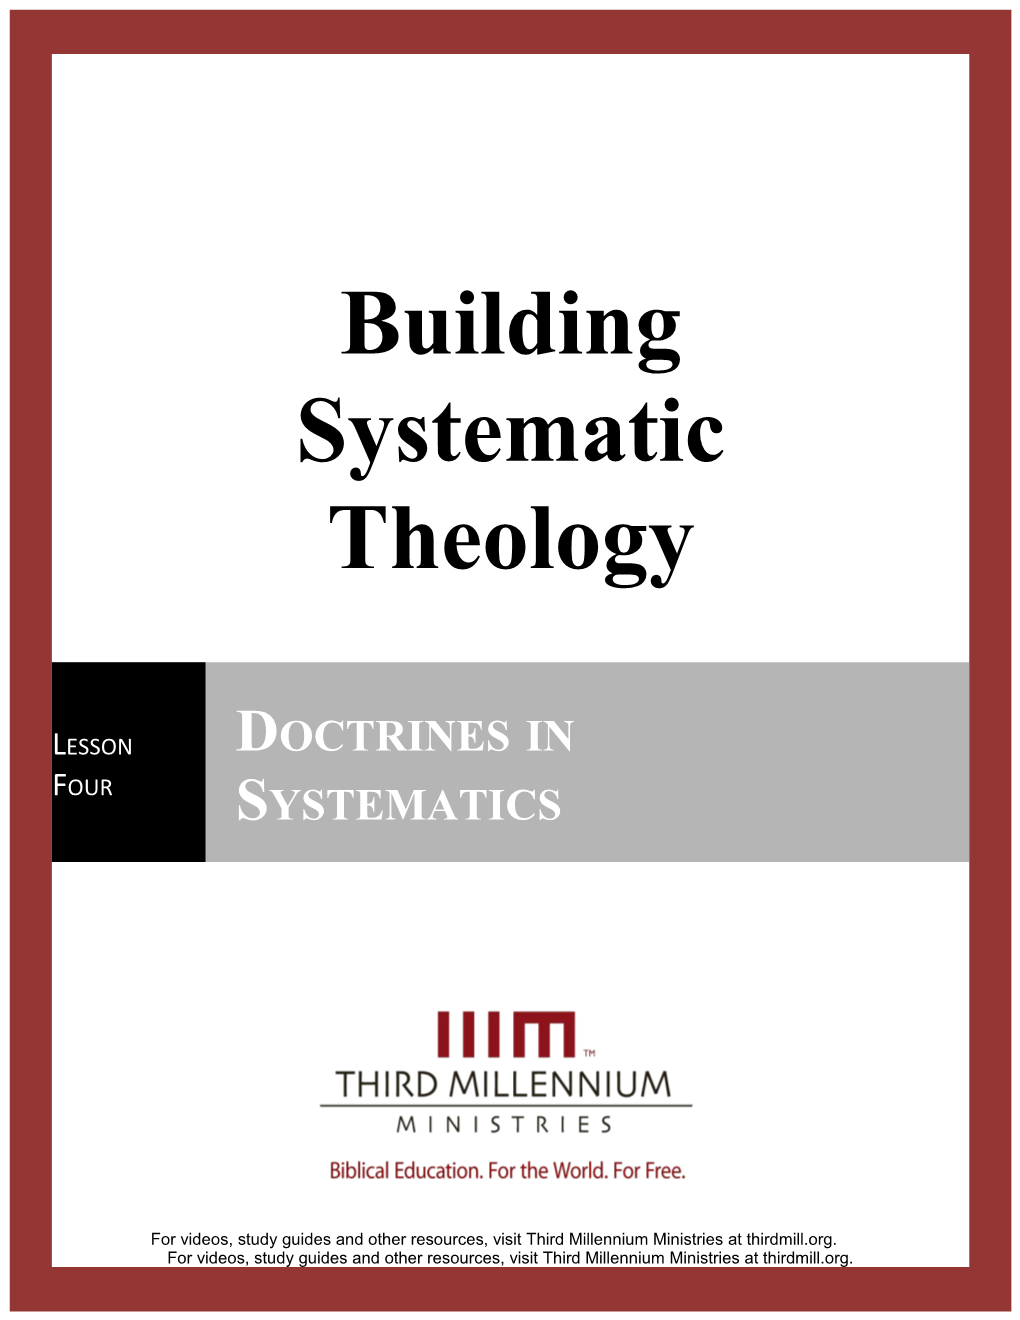 Building Systematic Theology, Lesson 4